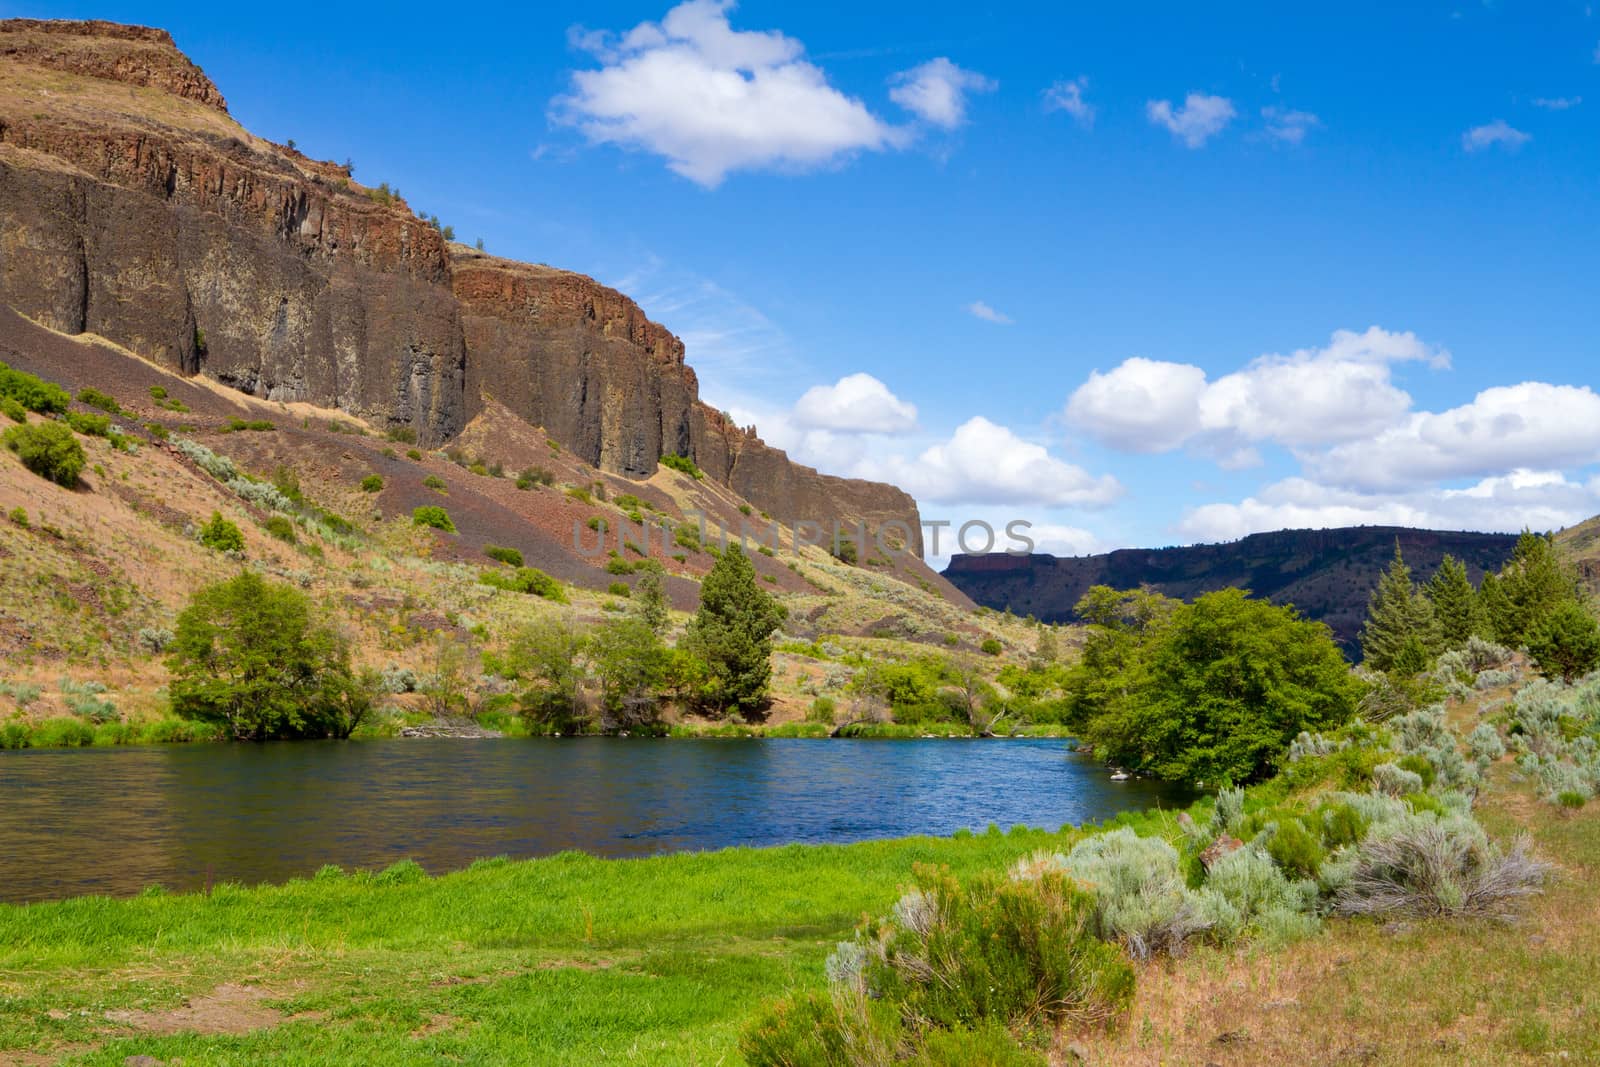 Photographs from the wild and scenic section of the Lower Deschutes River canyon in Oregon near Madras in the Eastern / Central part of the state.